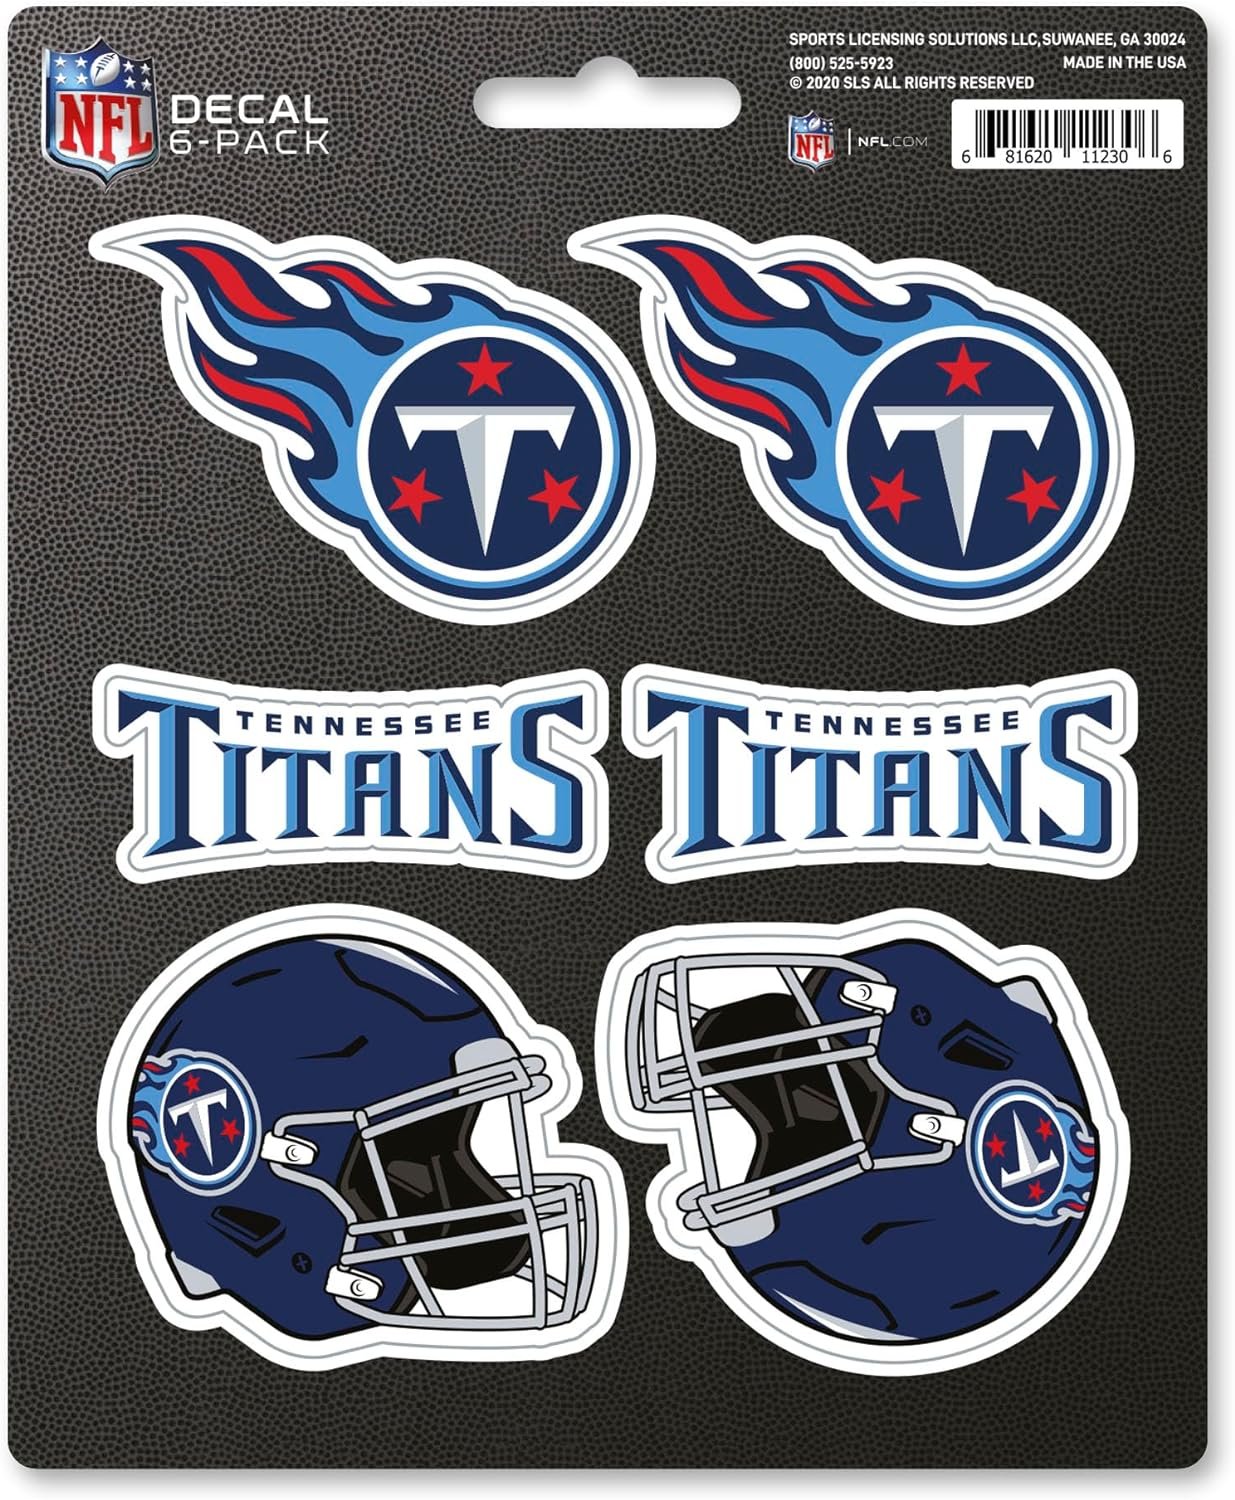 Tennessee Titans 6-Piece Decal Sticker Set, 5x6 Inch Sheet, Gift for football fans for any hard surfaces around home, automotive, personal items